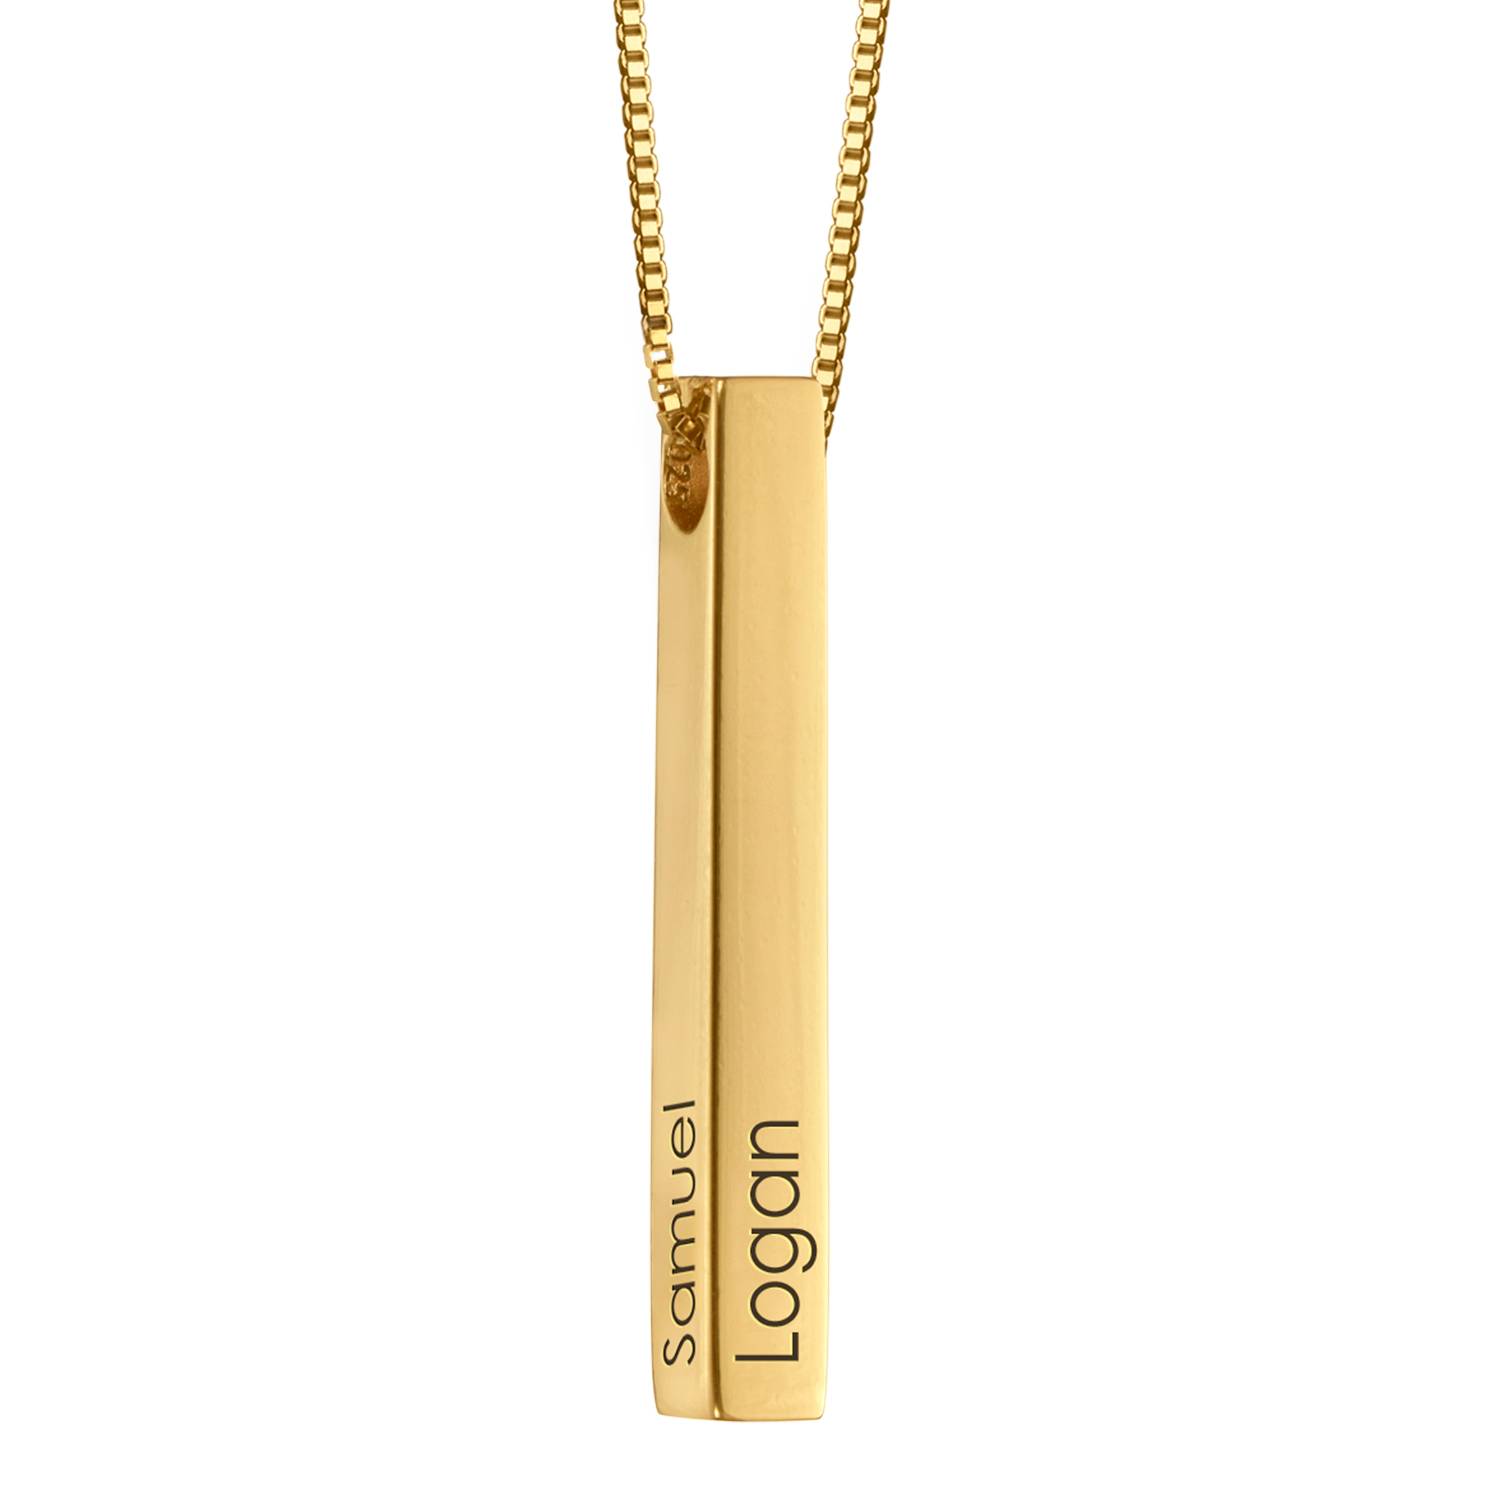 Totem 3D Bar Necklace in 18k Gold Vermeil-2 product photo